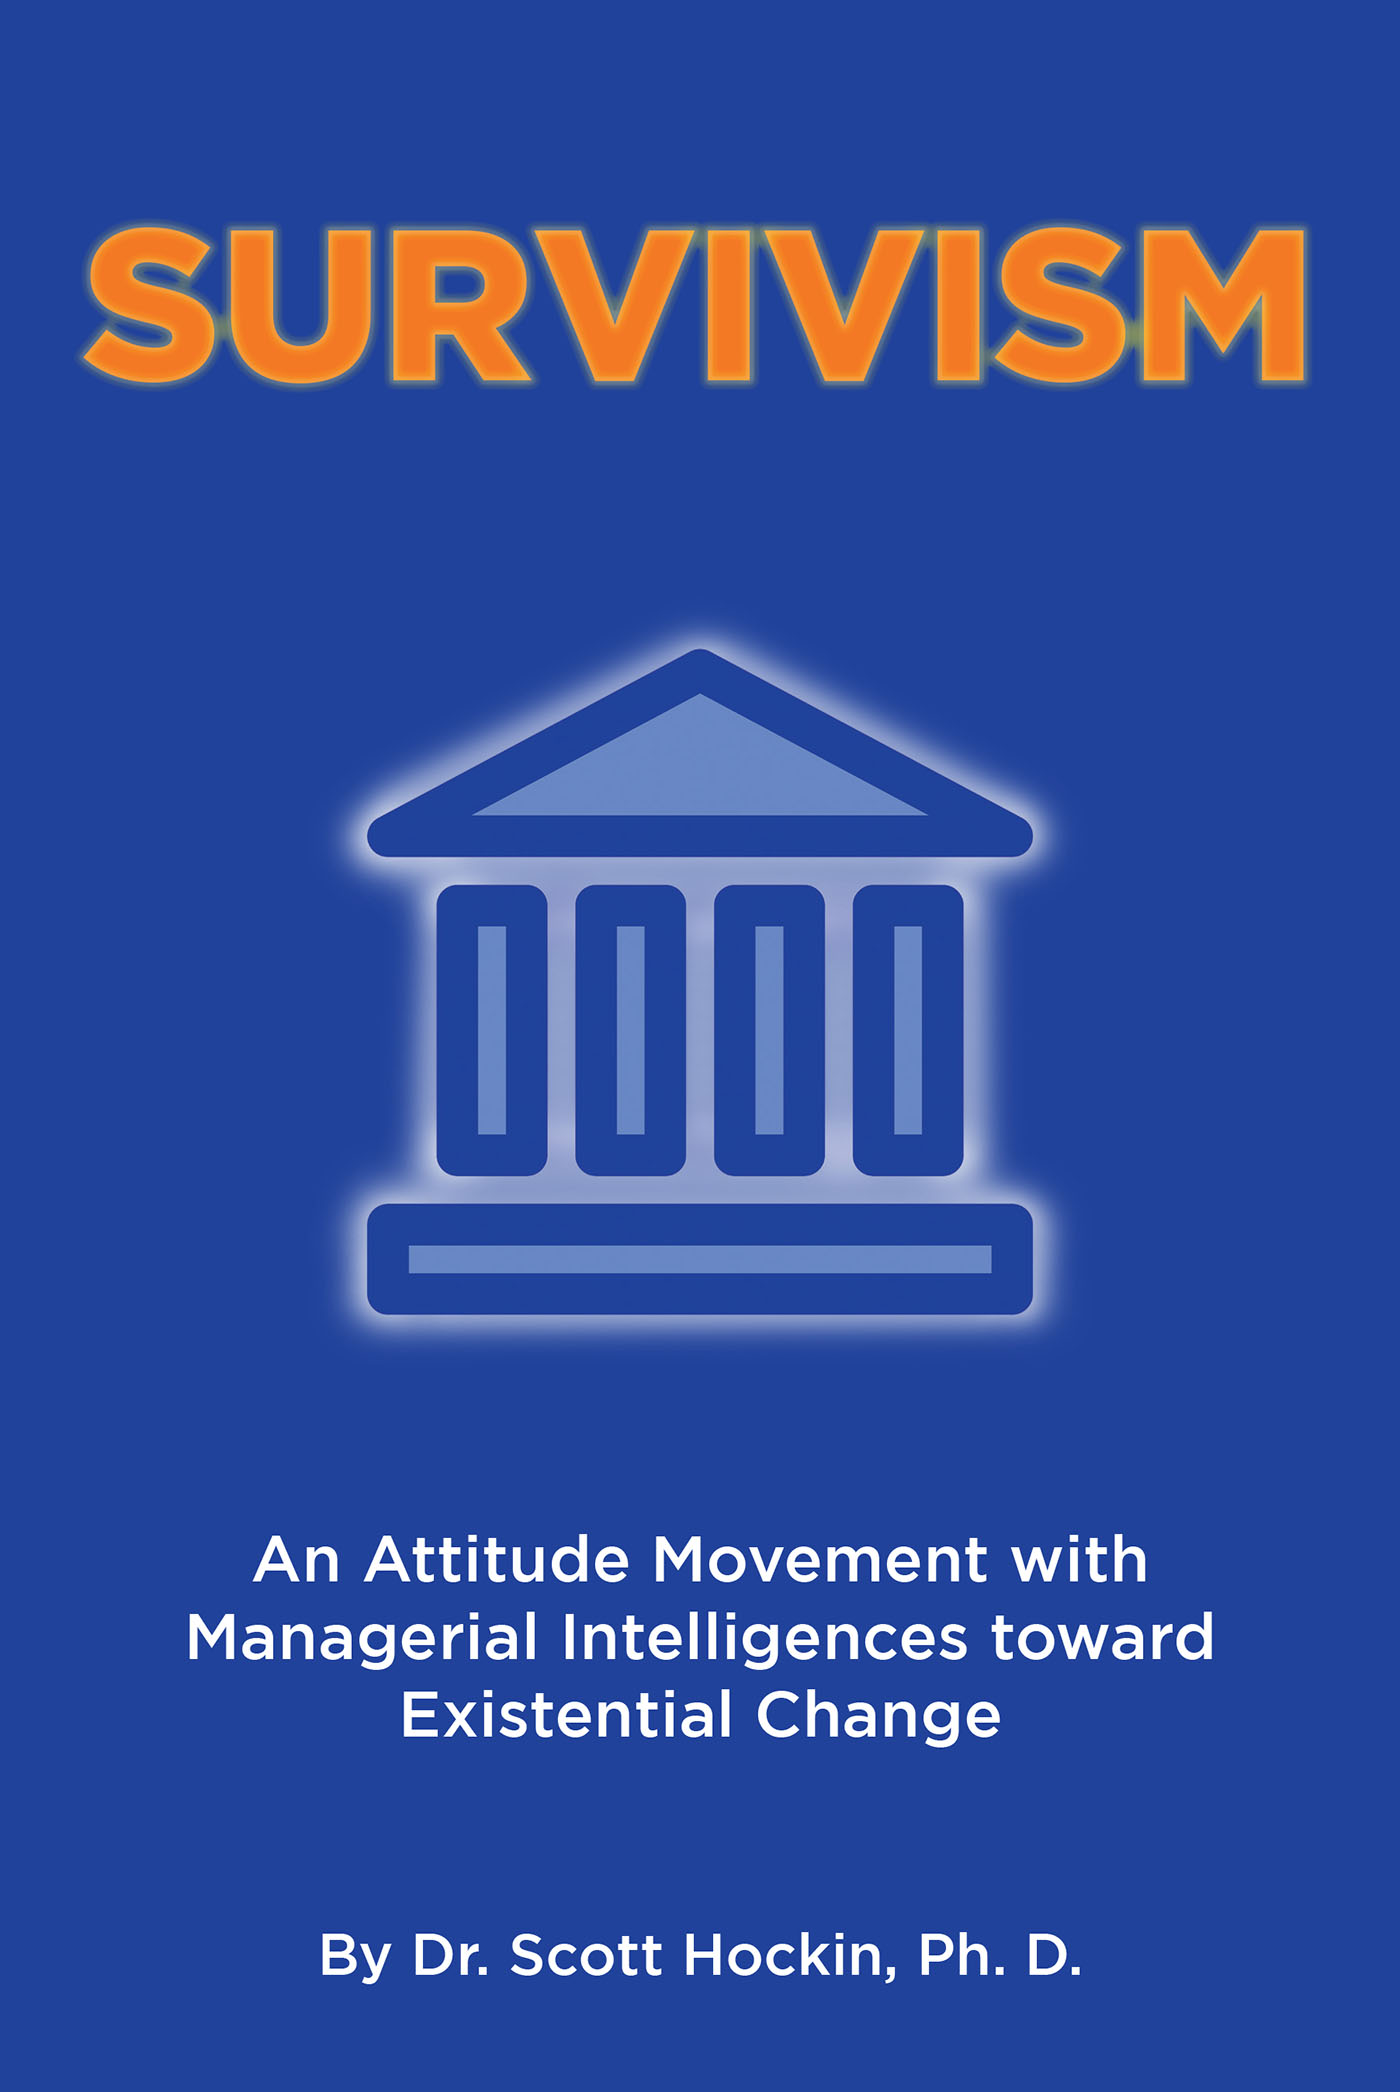 Author Dr. Scott Hockin, Ph. D.’s New Book, “Survivism: An Attitude Movement with Managerial Intelligences toward Existential Change,” Examines a New Way of Living